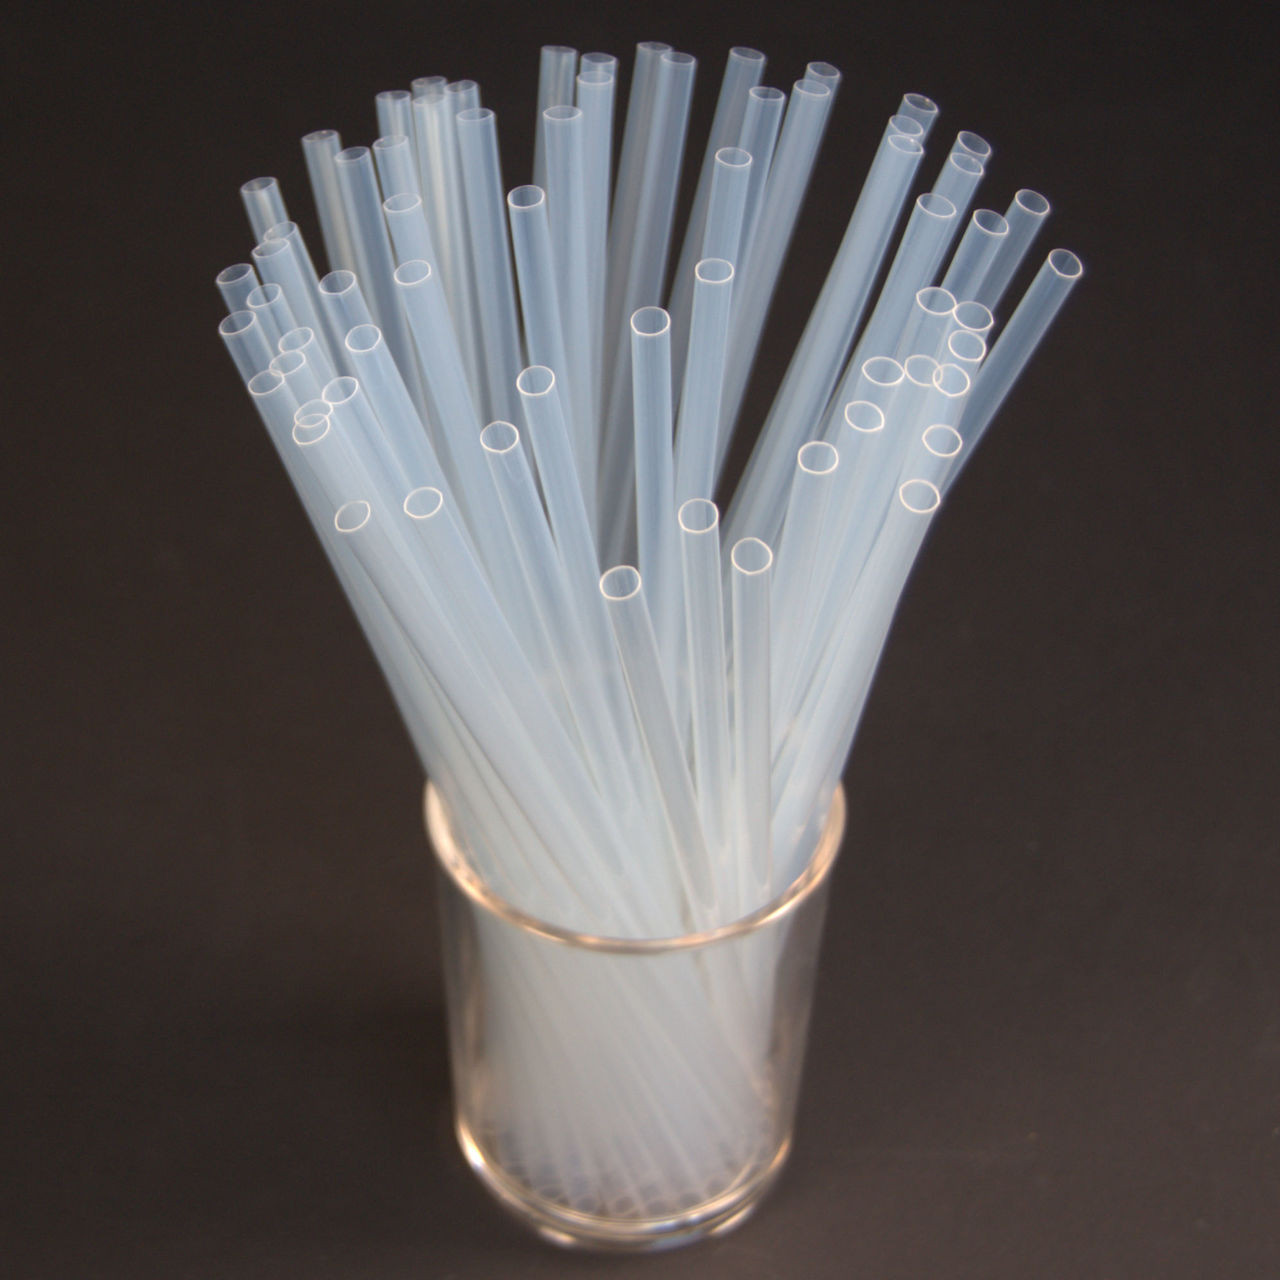 https://cdn11.bigcommerce.com/s-tjx0gy7pkp/images/stencil/1280x1280/products/10260/19069/DRINKING_STRAWS_CLEAR_FROM_STARLIGHT_PACKAGING__70524.1535809666.jpg?c=2